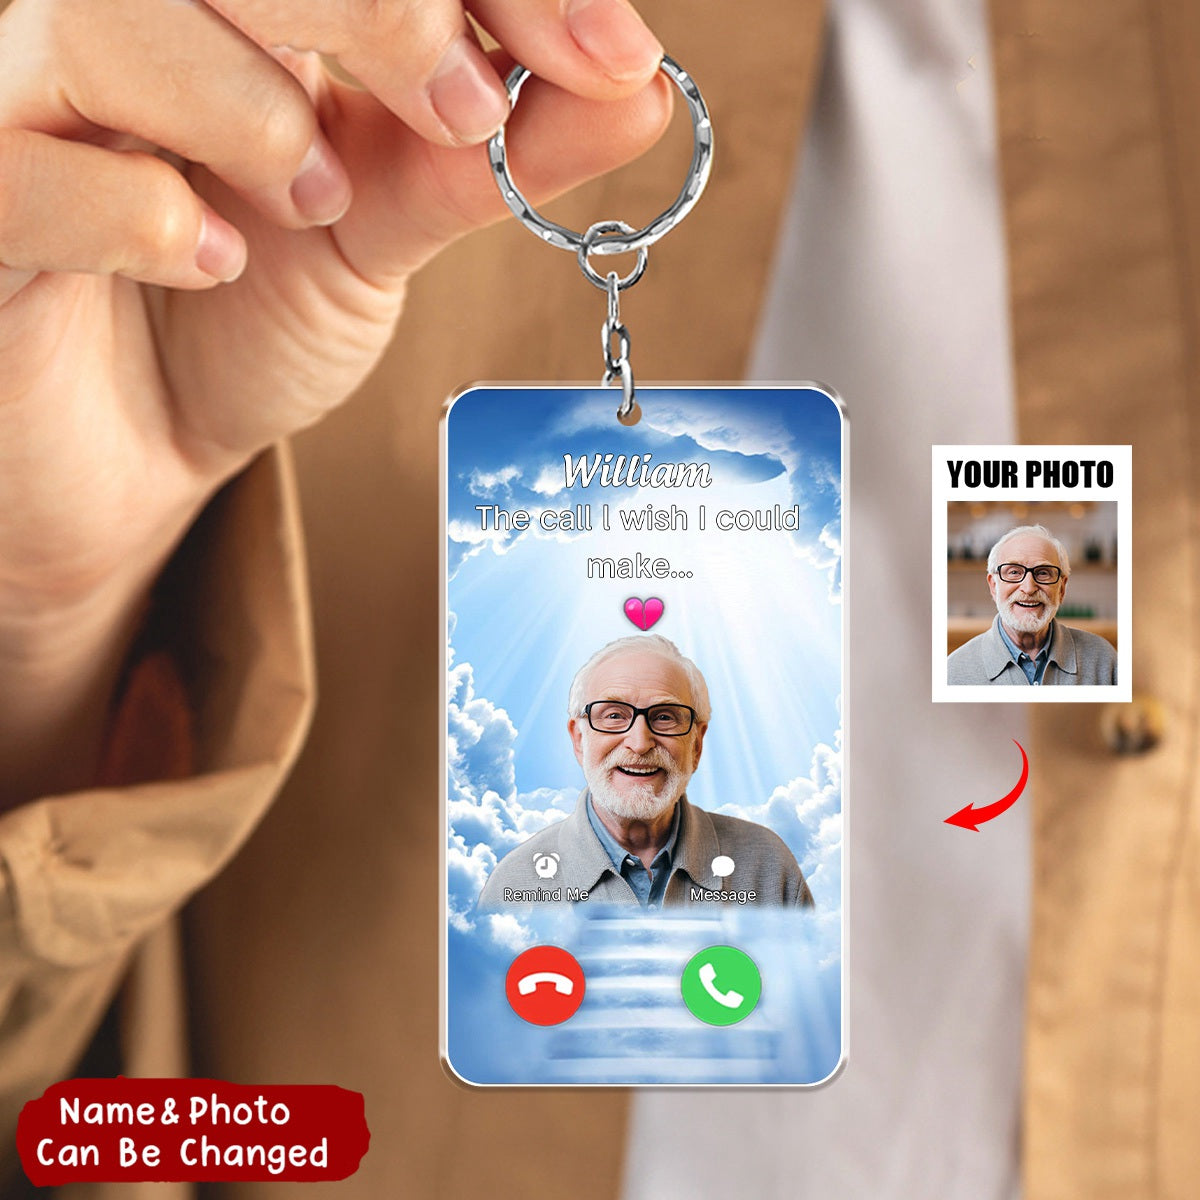 The Call l Wish l Could Make Upload Photo Personalized Memorial Acrylic Keychain